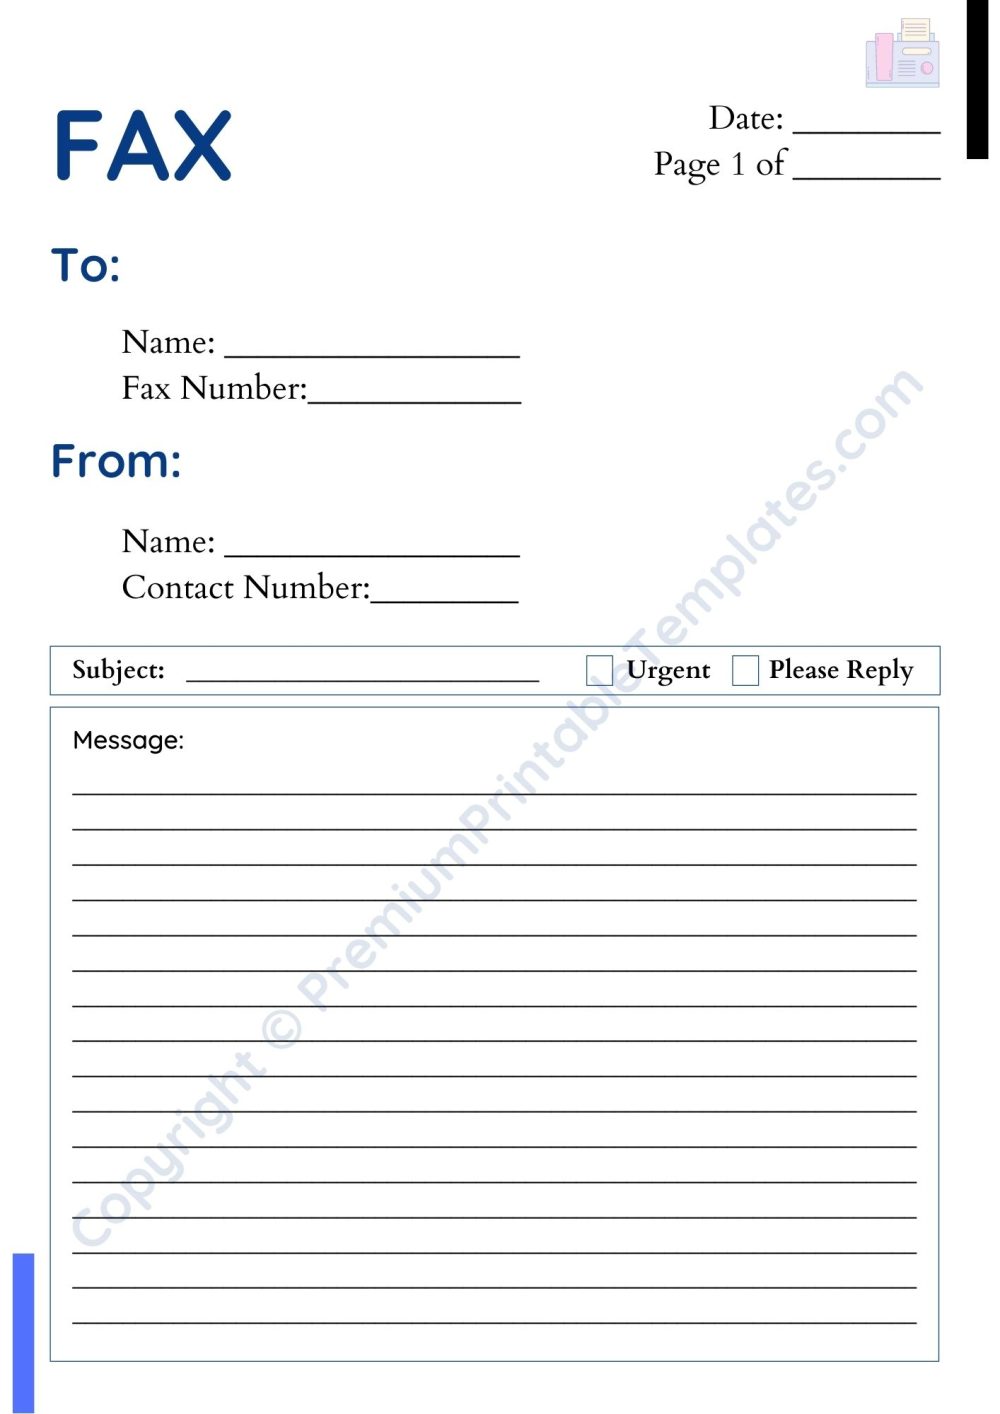 Generic Fax Cover Sheet